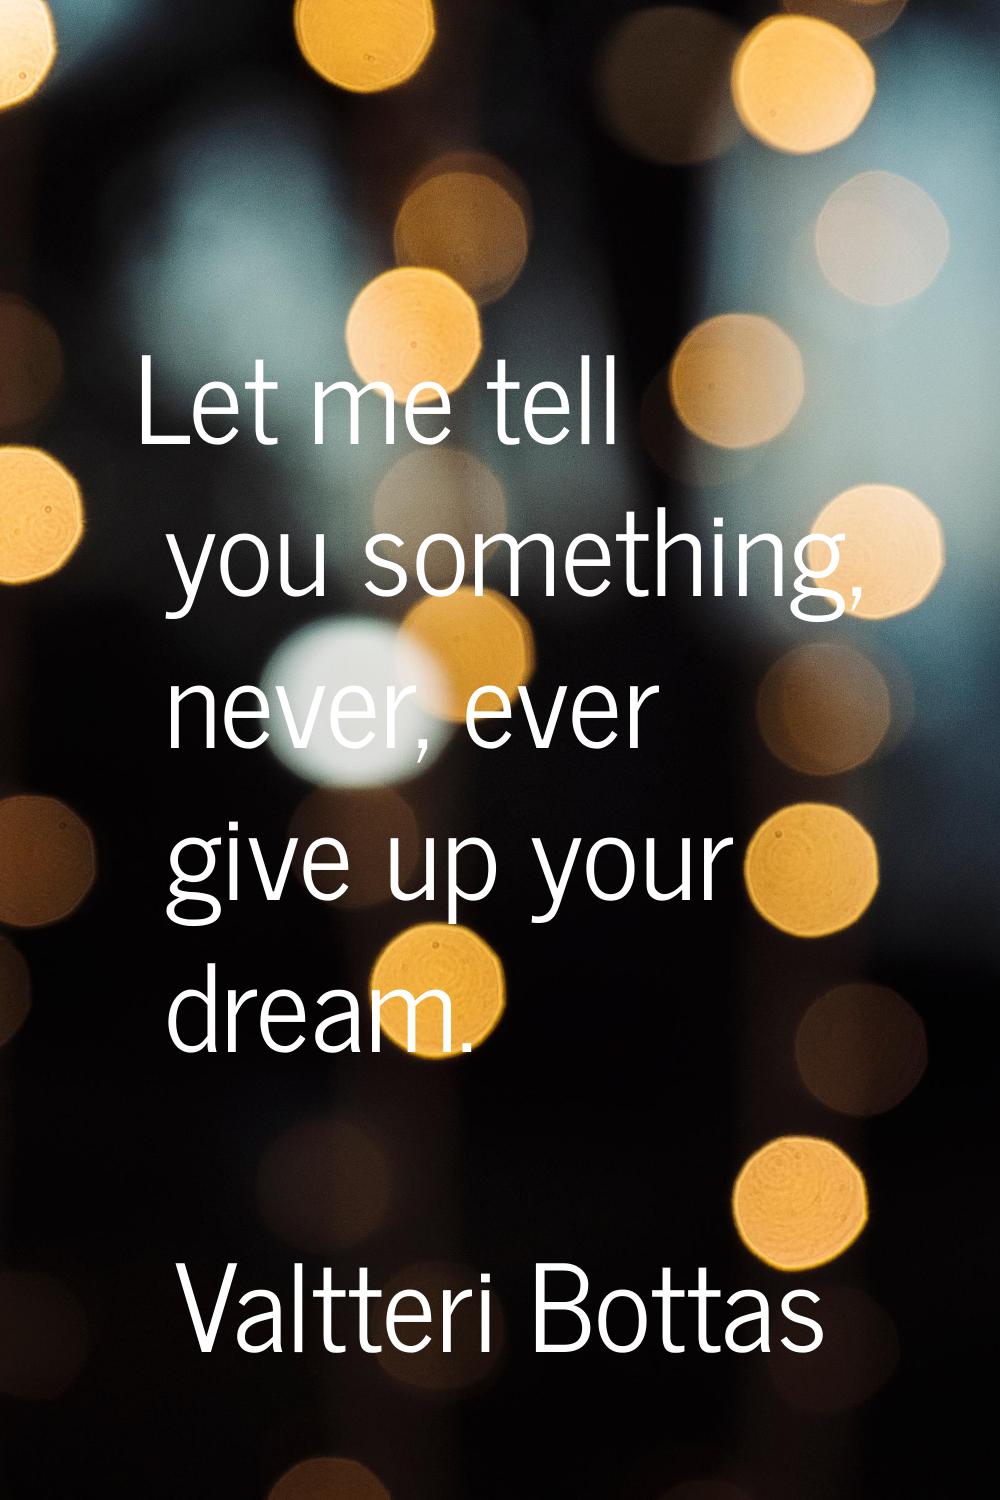 Let me tell you something, never, ever give up your dream.